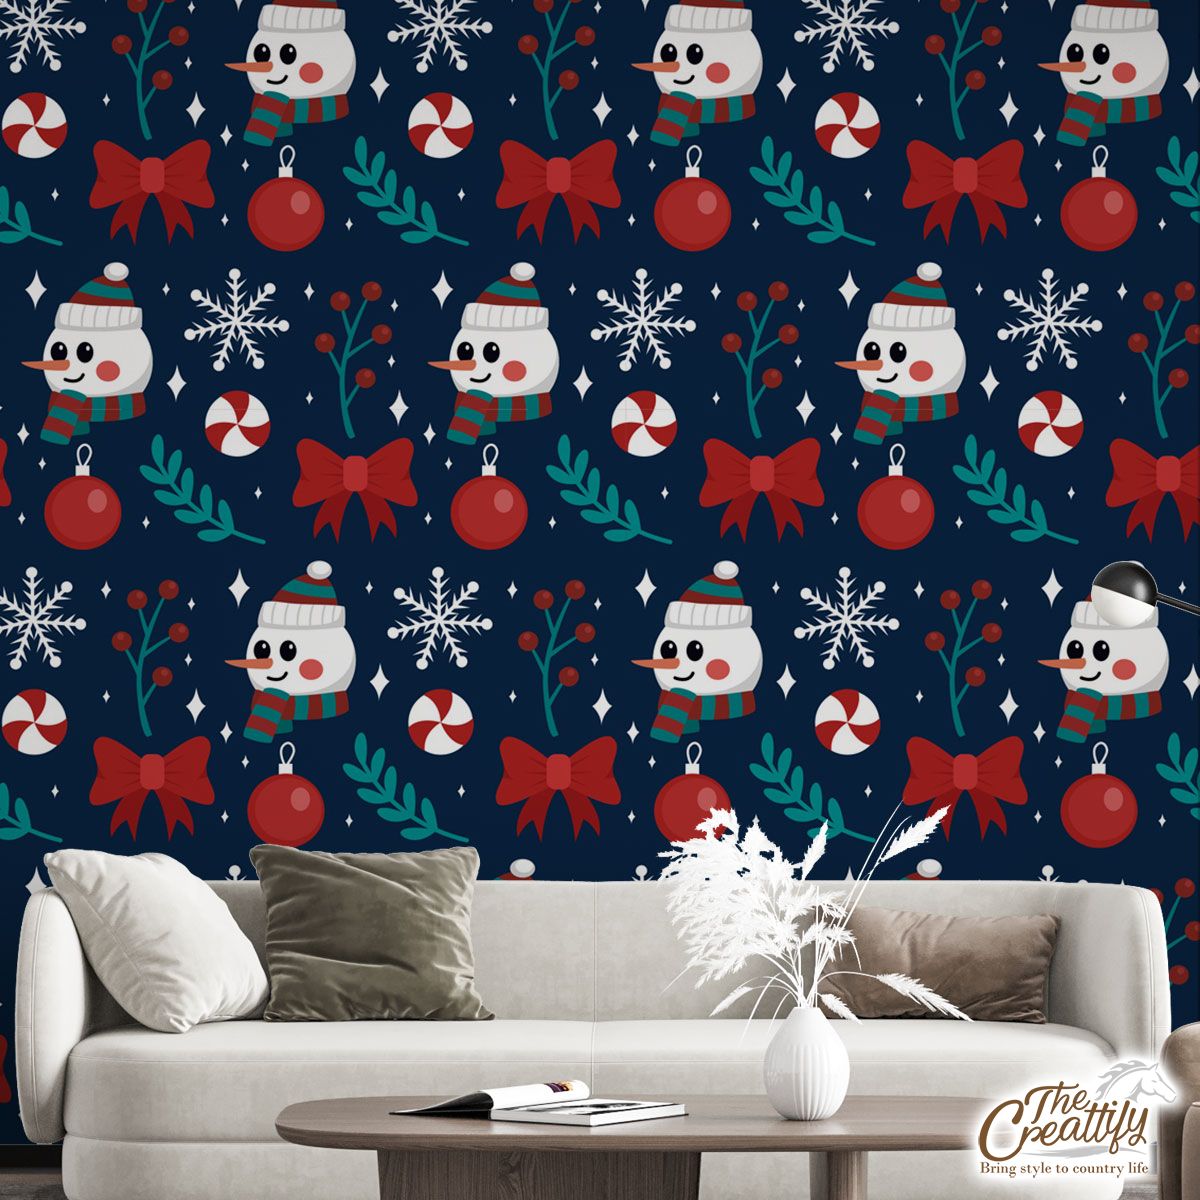 Snowman Face With Baubles And Christmas Bow Wall Mural